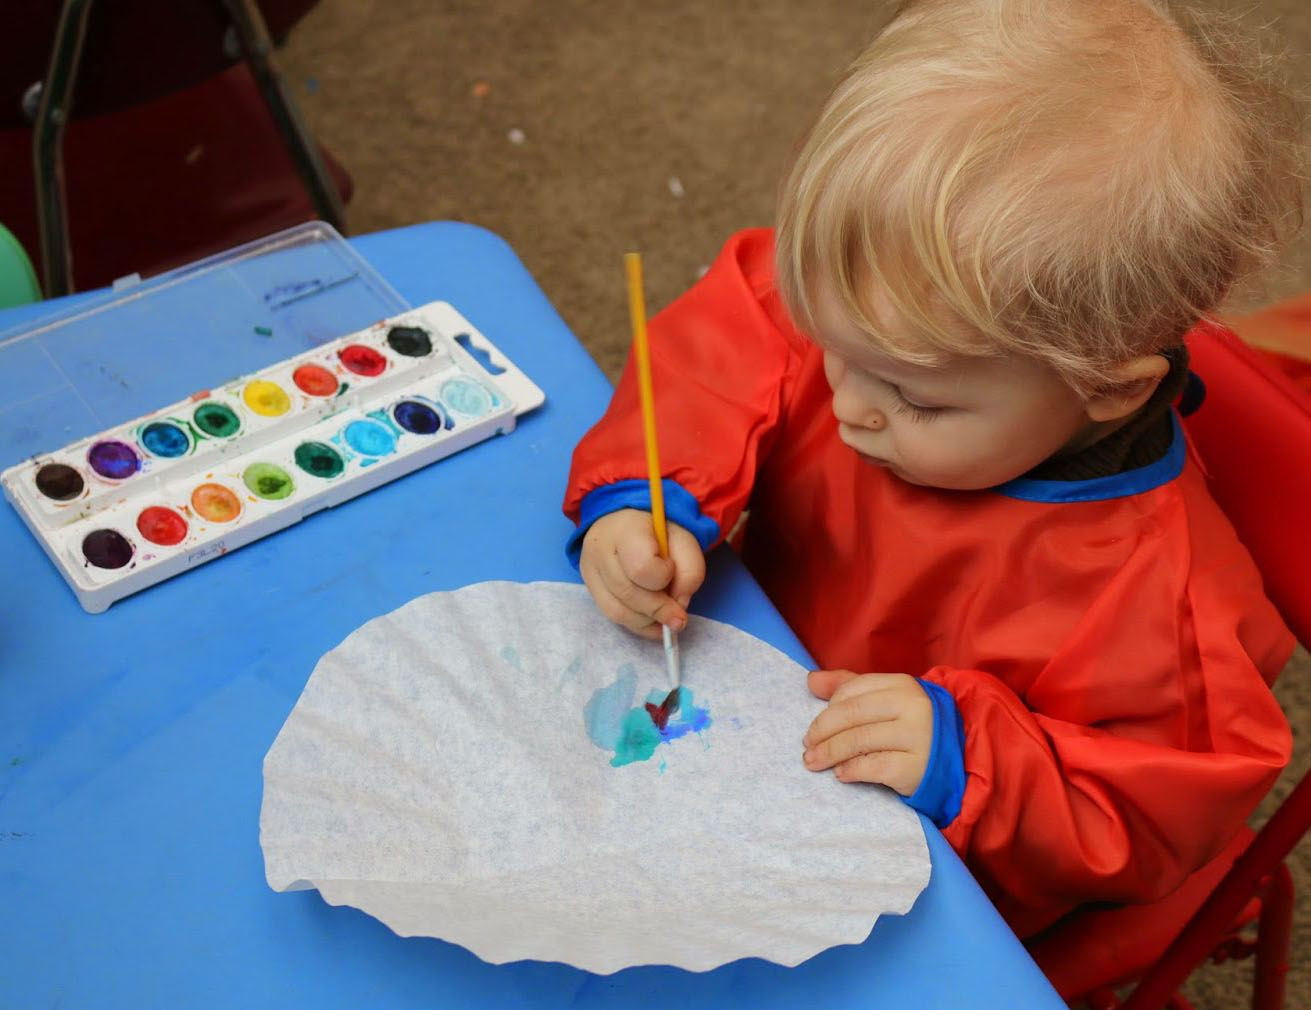 Child Art And Craft
 Celebrate Week of the Young Child with these fun activity